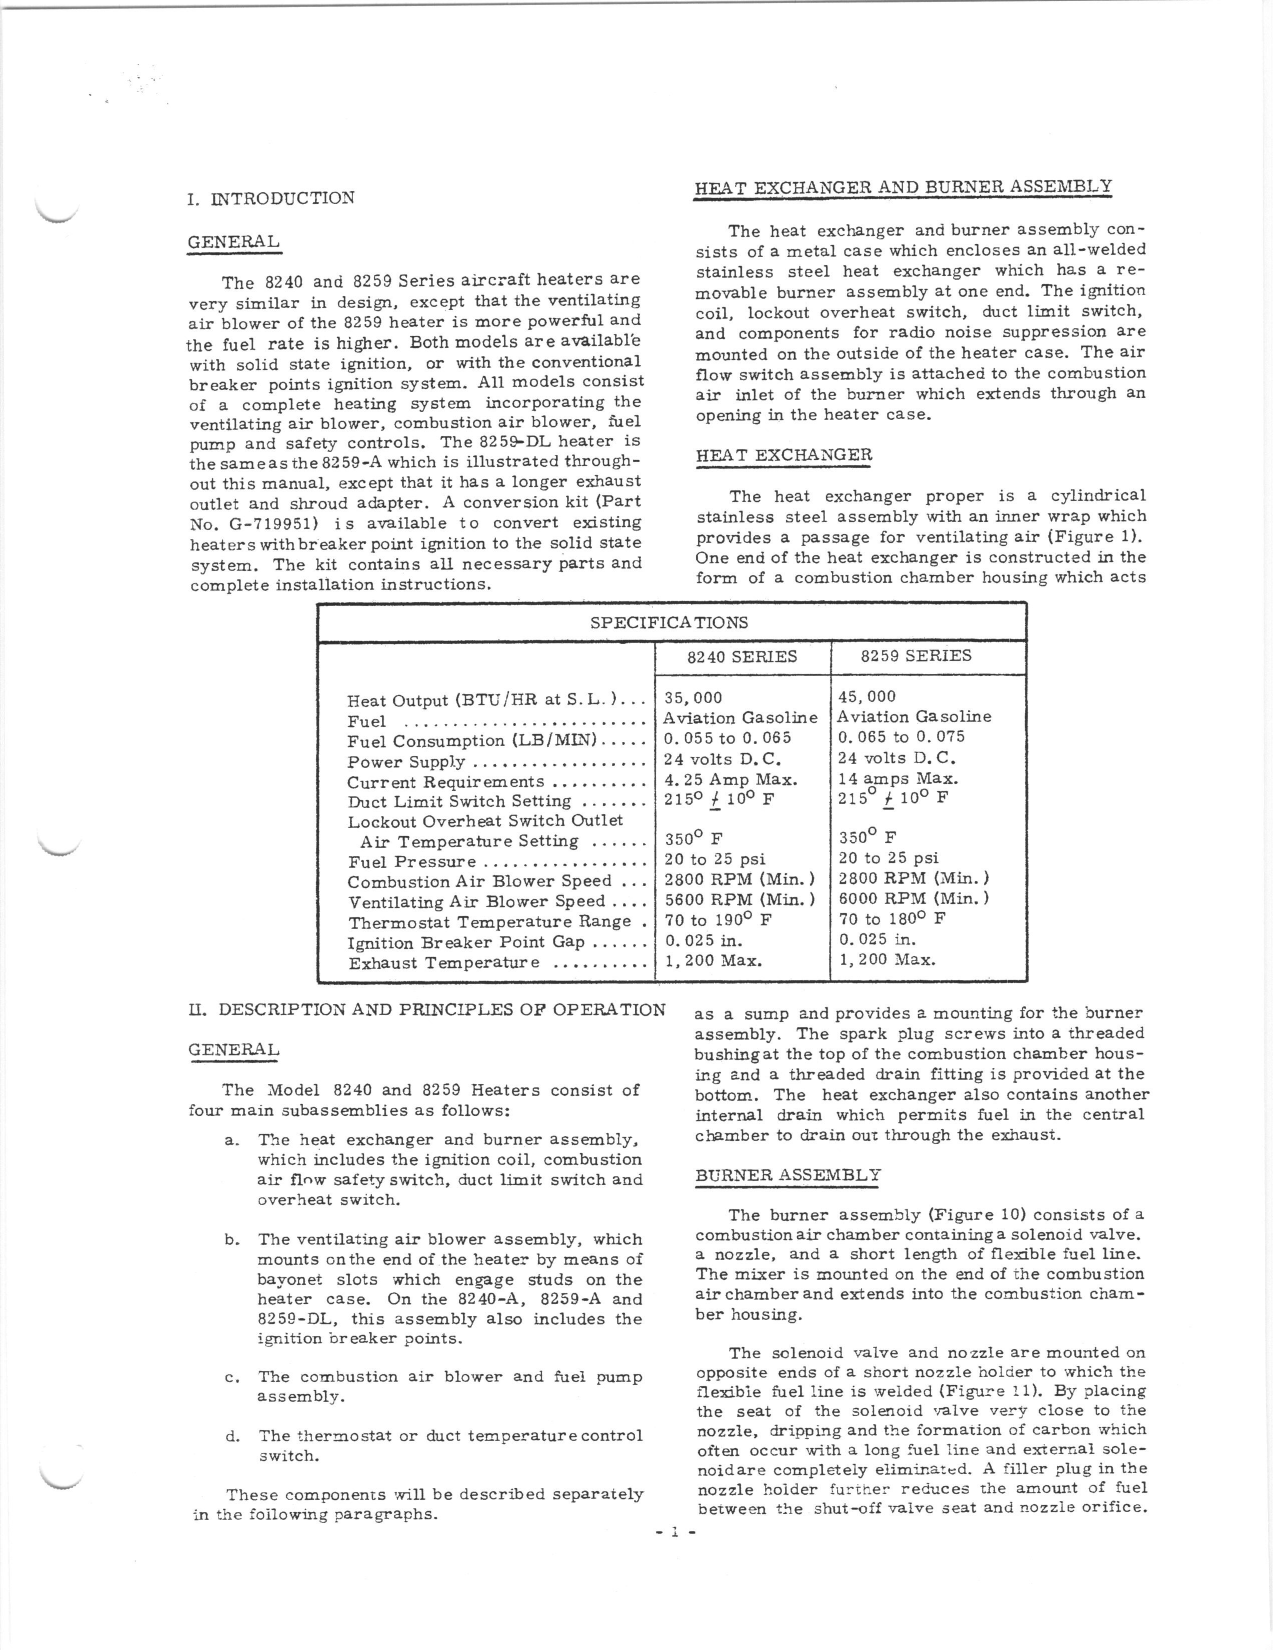 Sample page 5 from AirCorps Library document: Service Manual for South Wind Aircraft Heaters